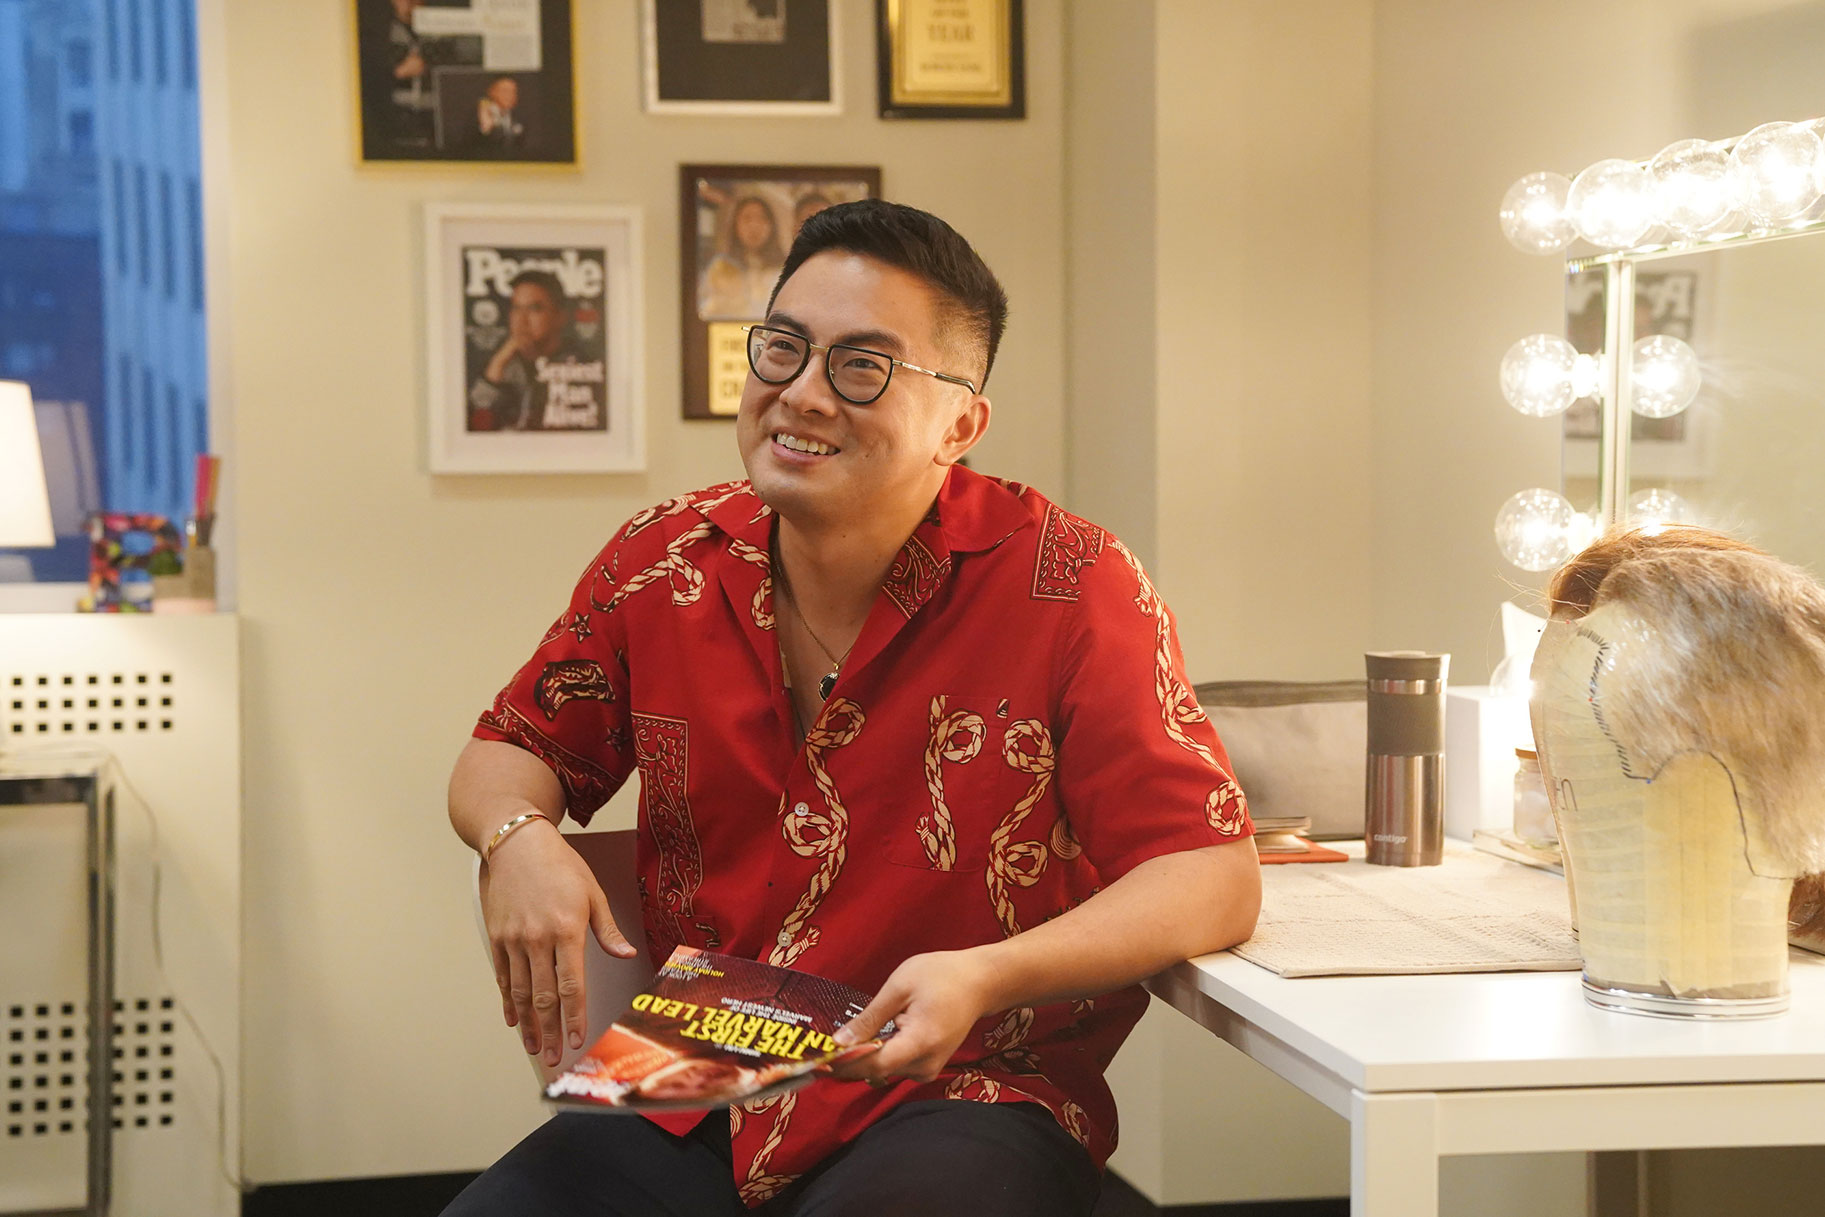 Bowen Yang seated in his dressing room, smiling